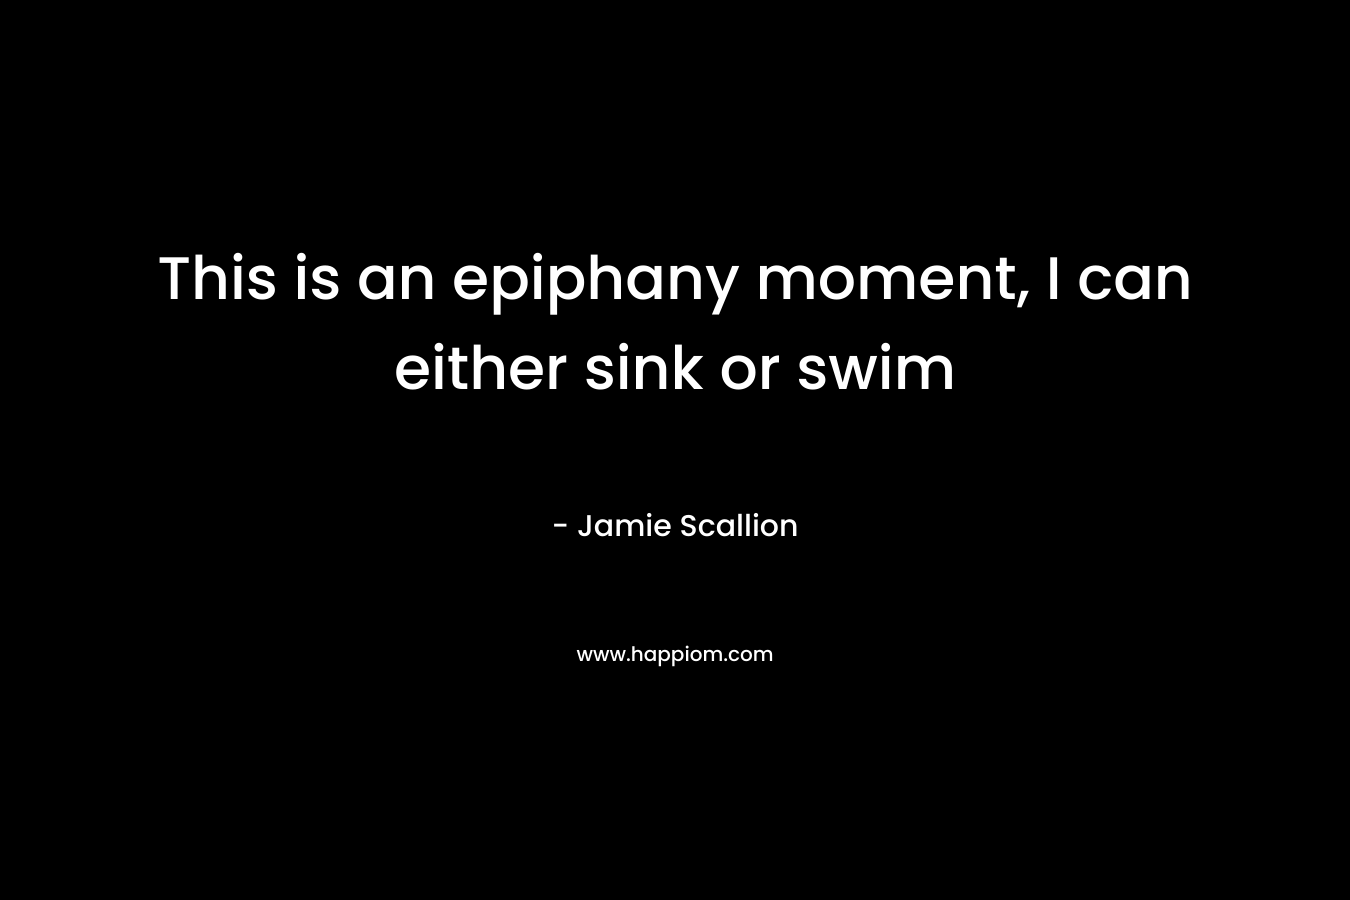 This is an epiphany moment, I can either sink or swim – Jamie Scallion